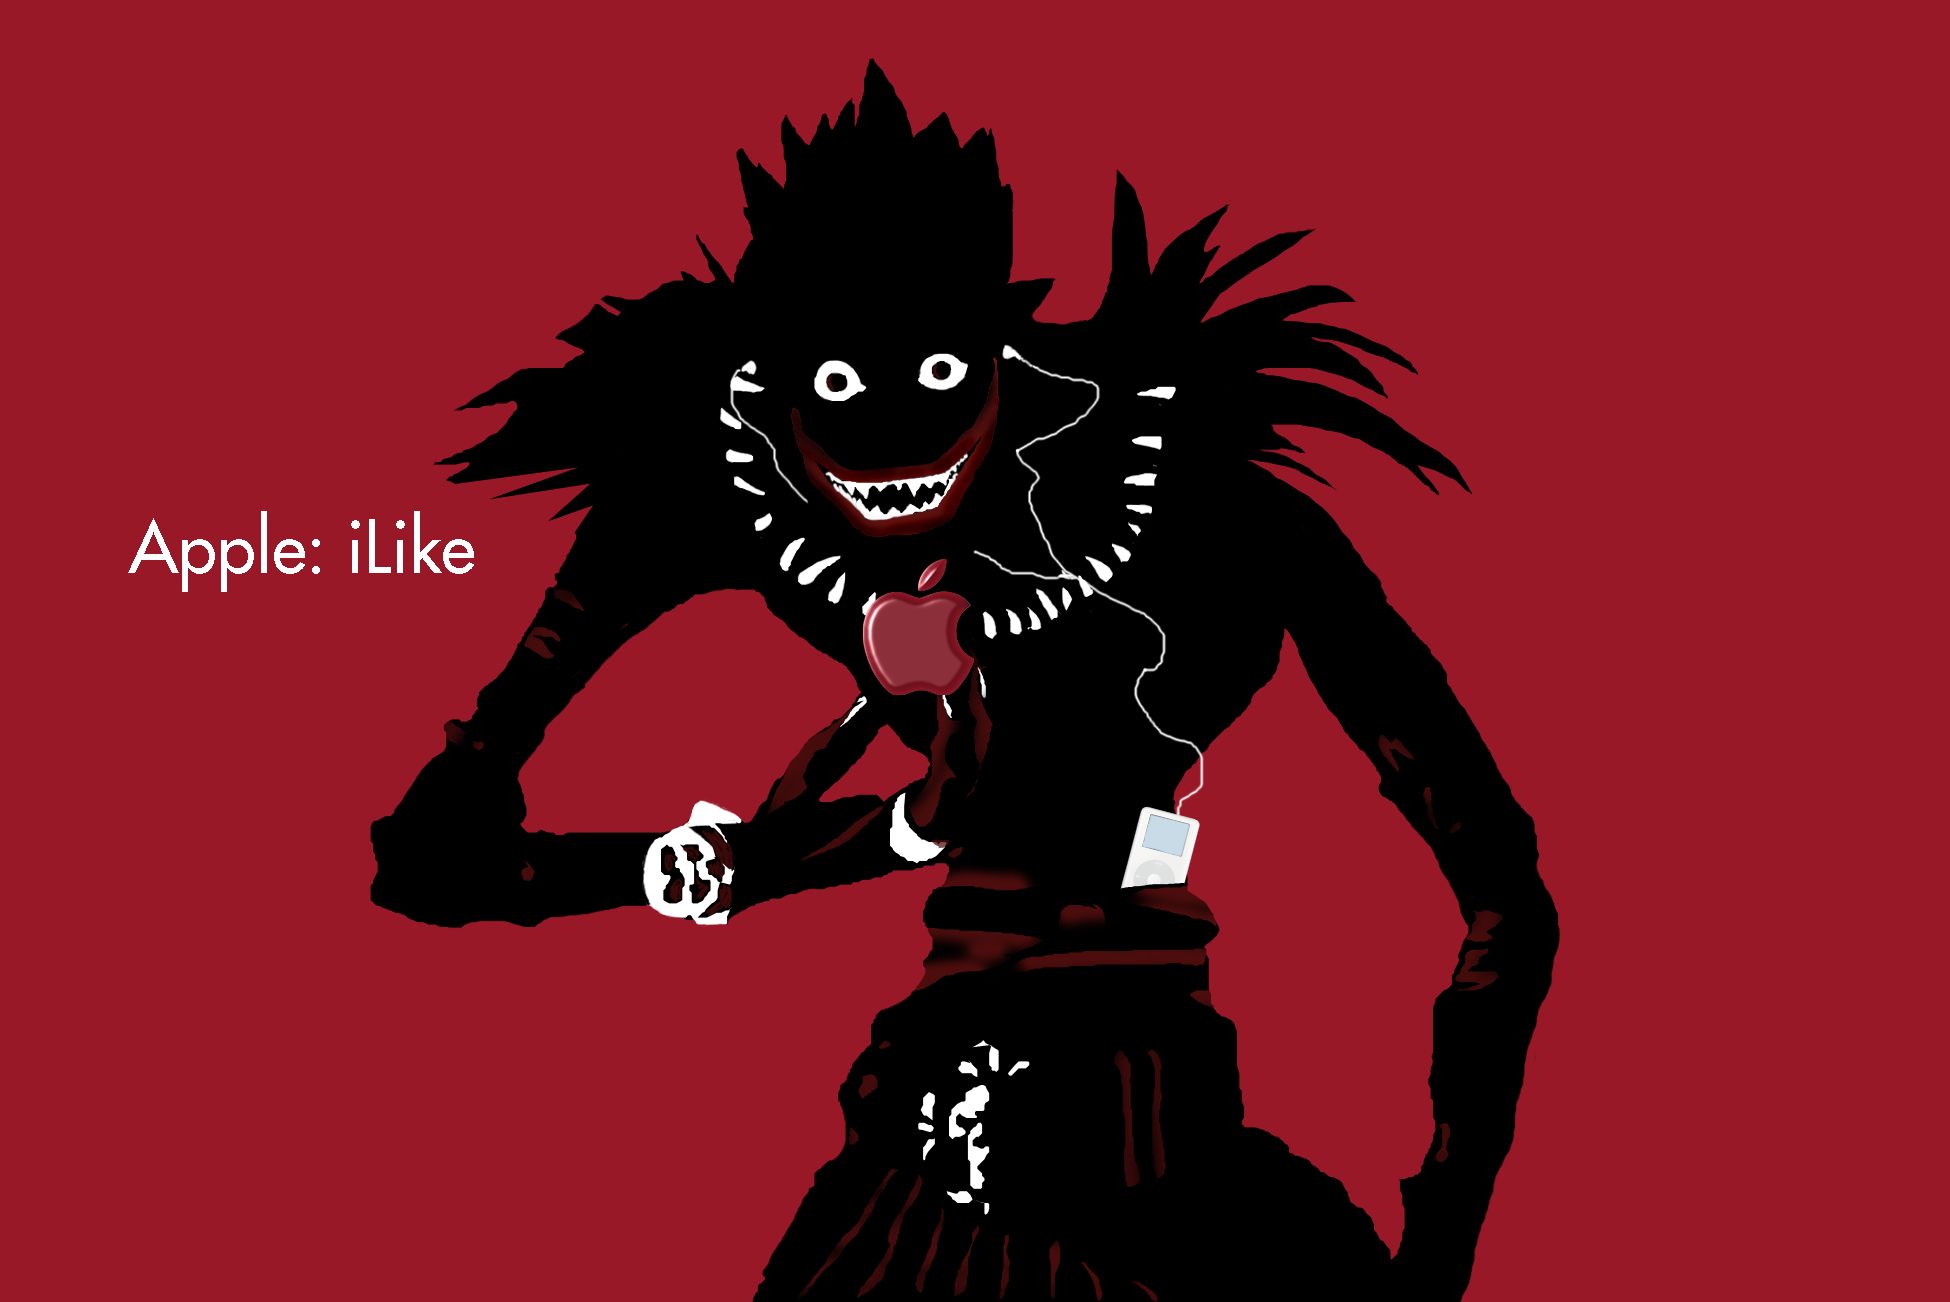 Death Note Wallpapers Ryuk Group 68